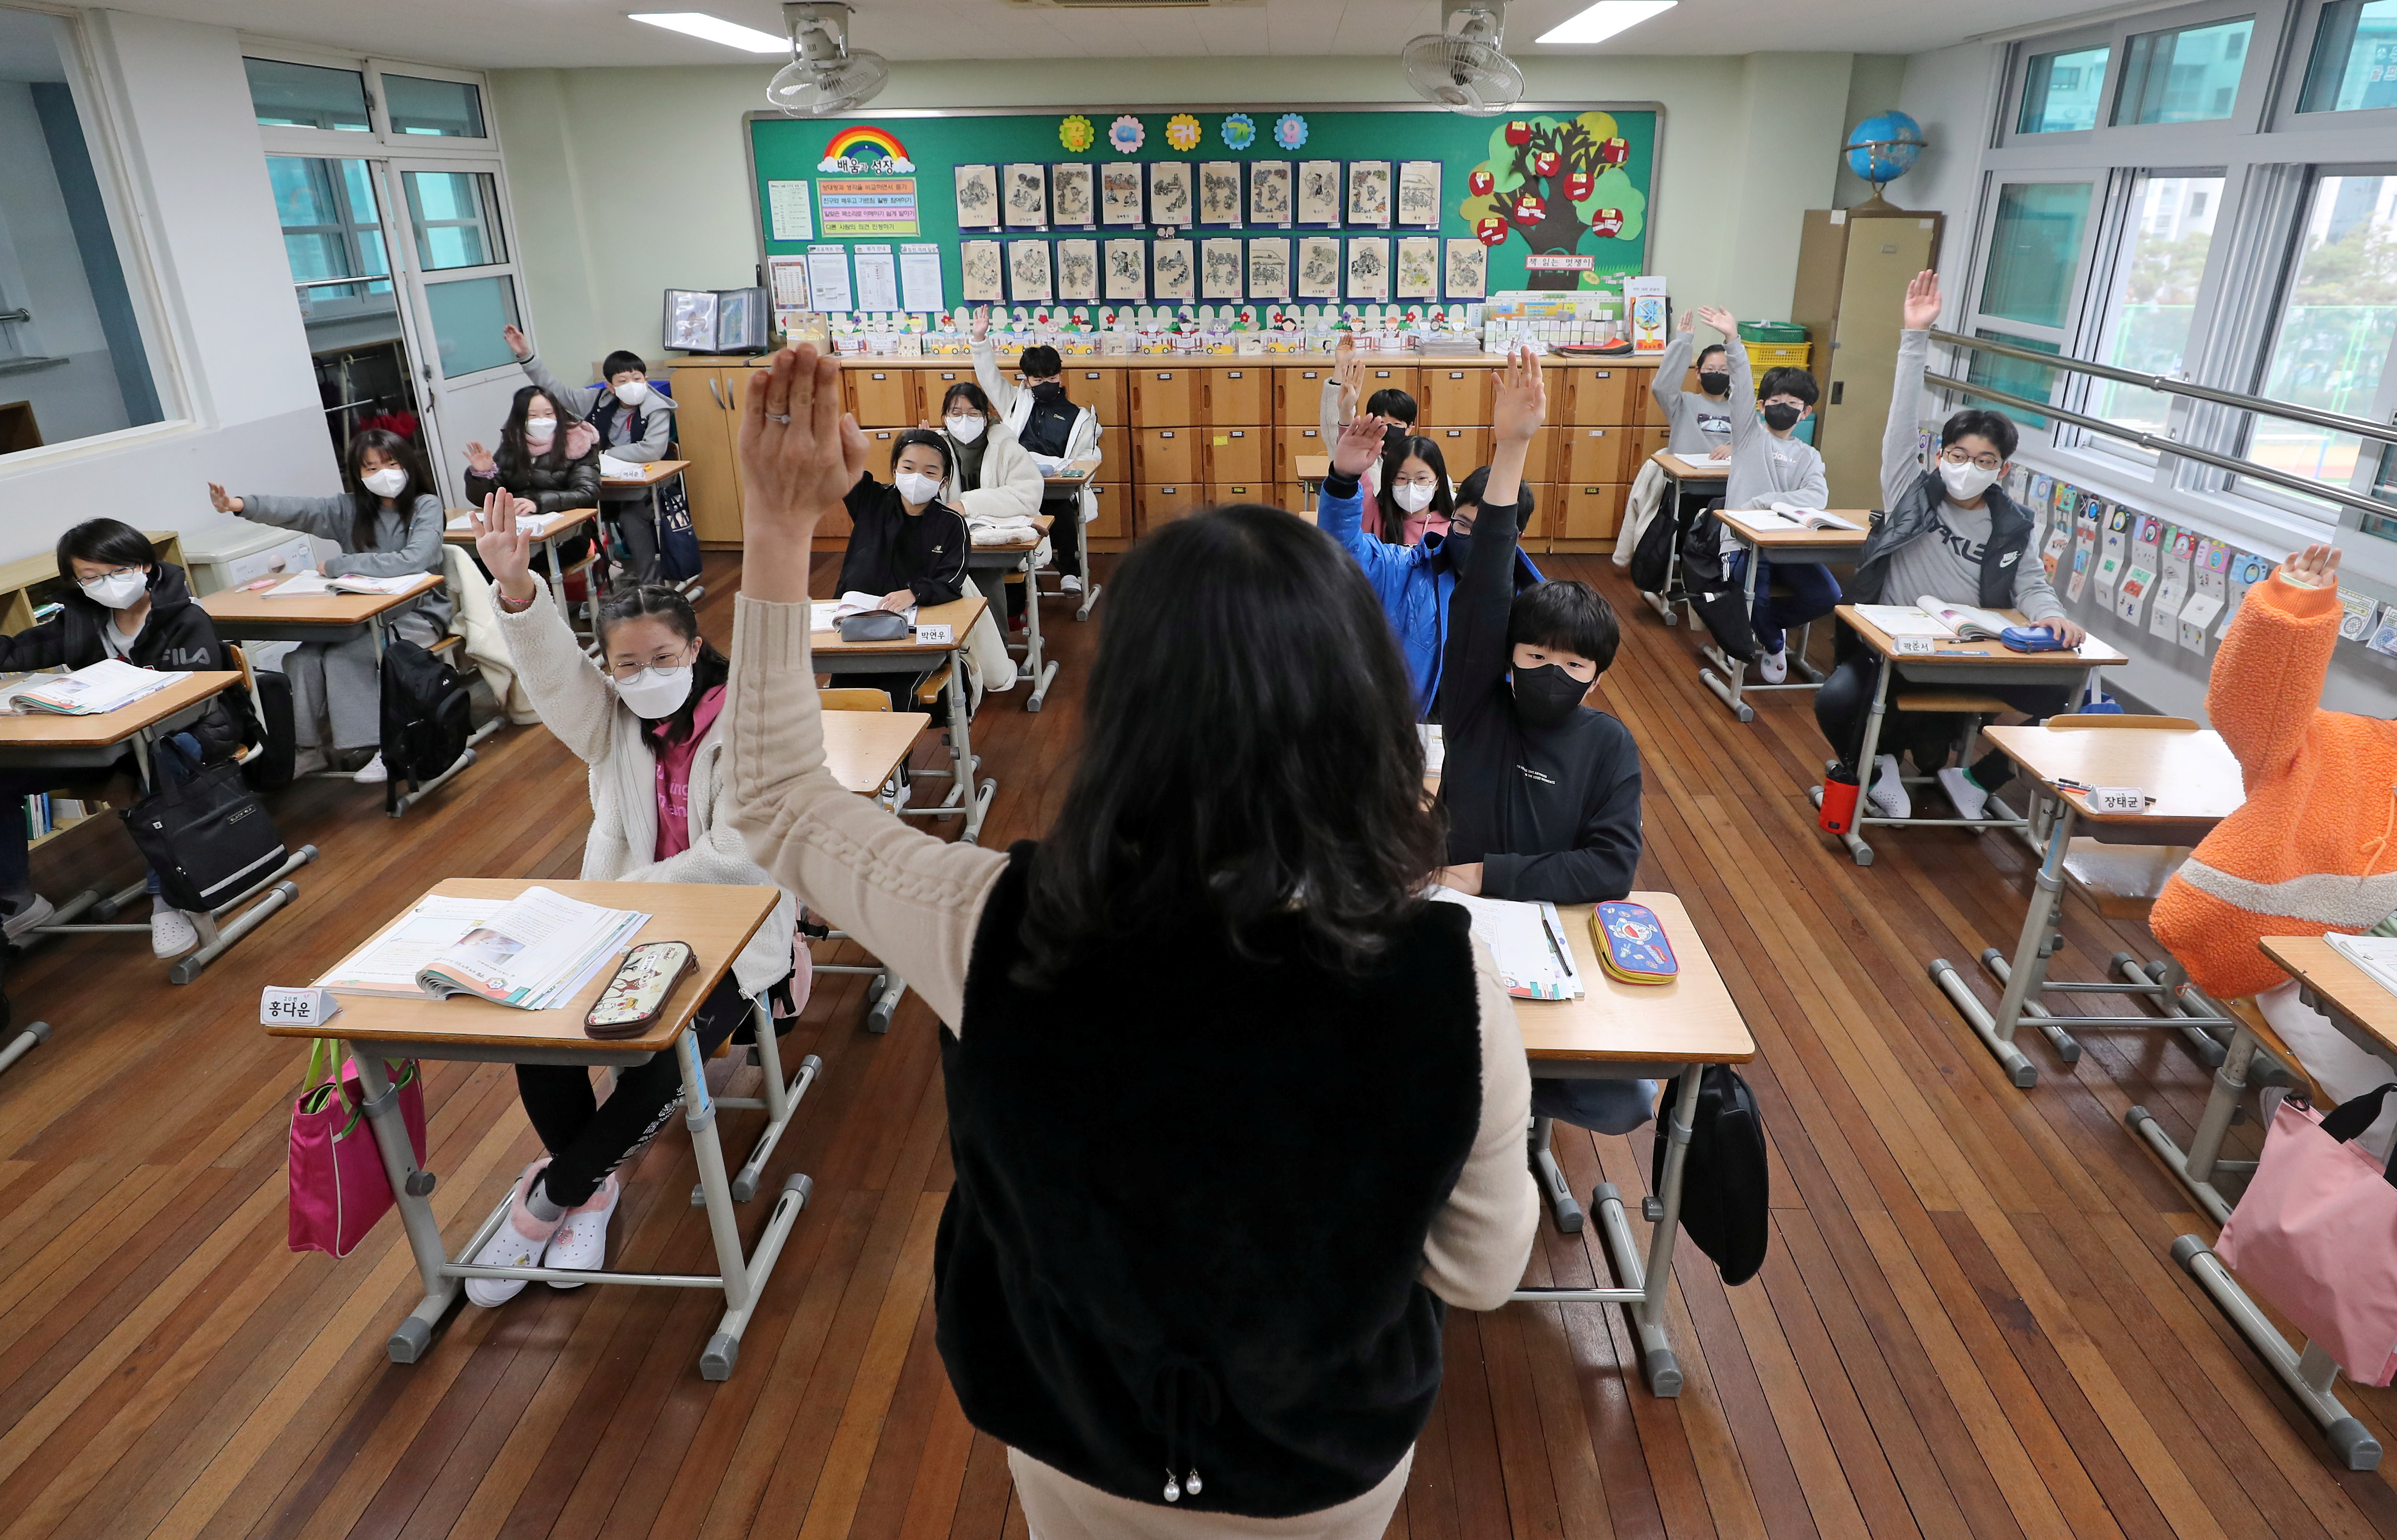 Children attend a class at an elementary school in Daejeon